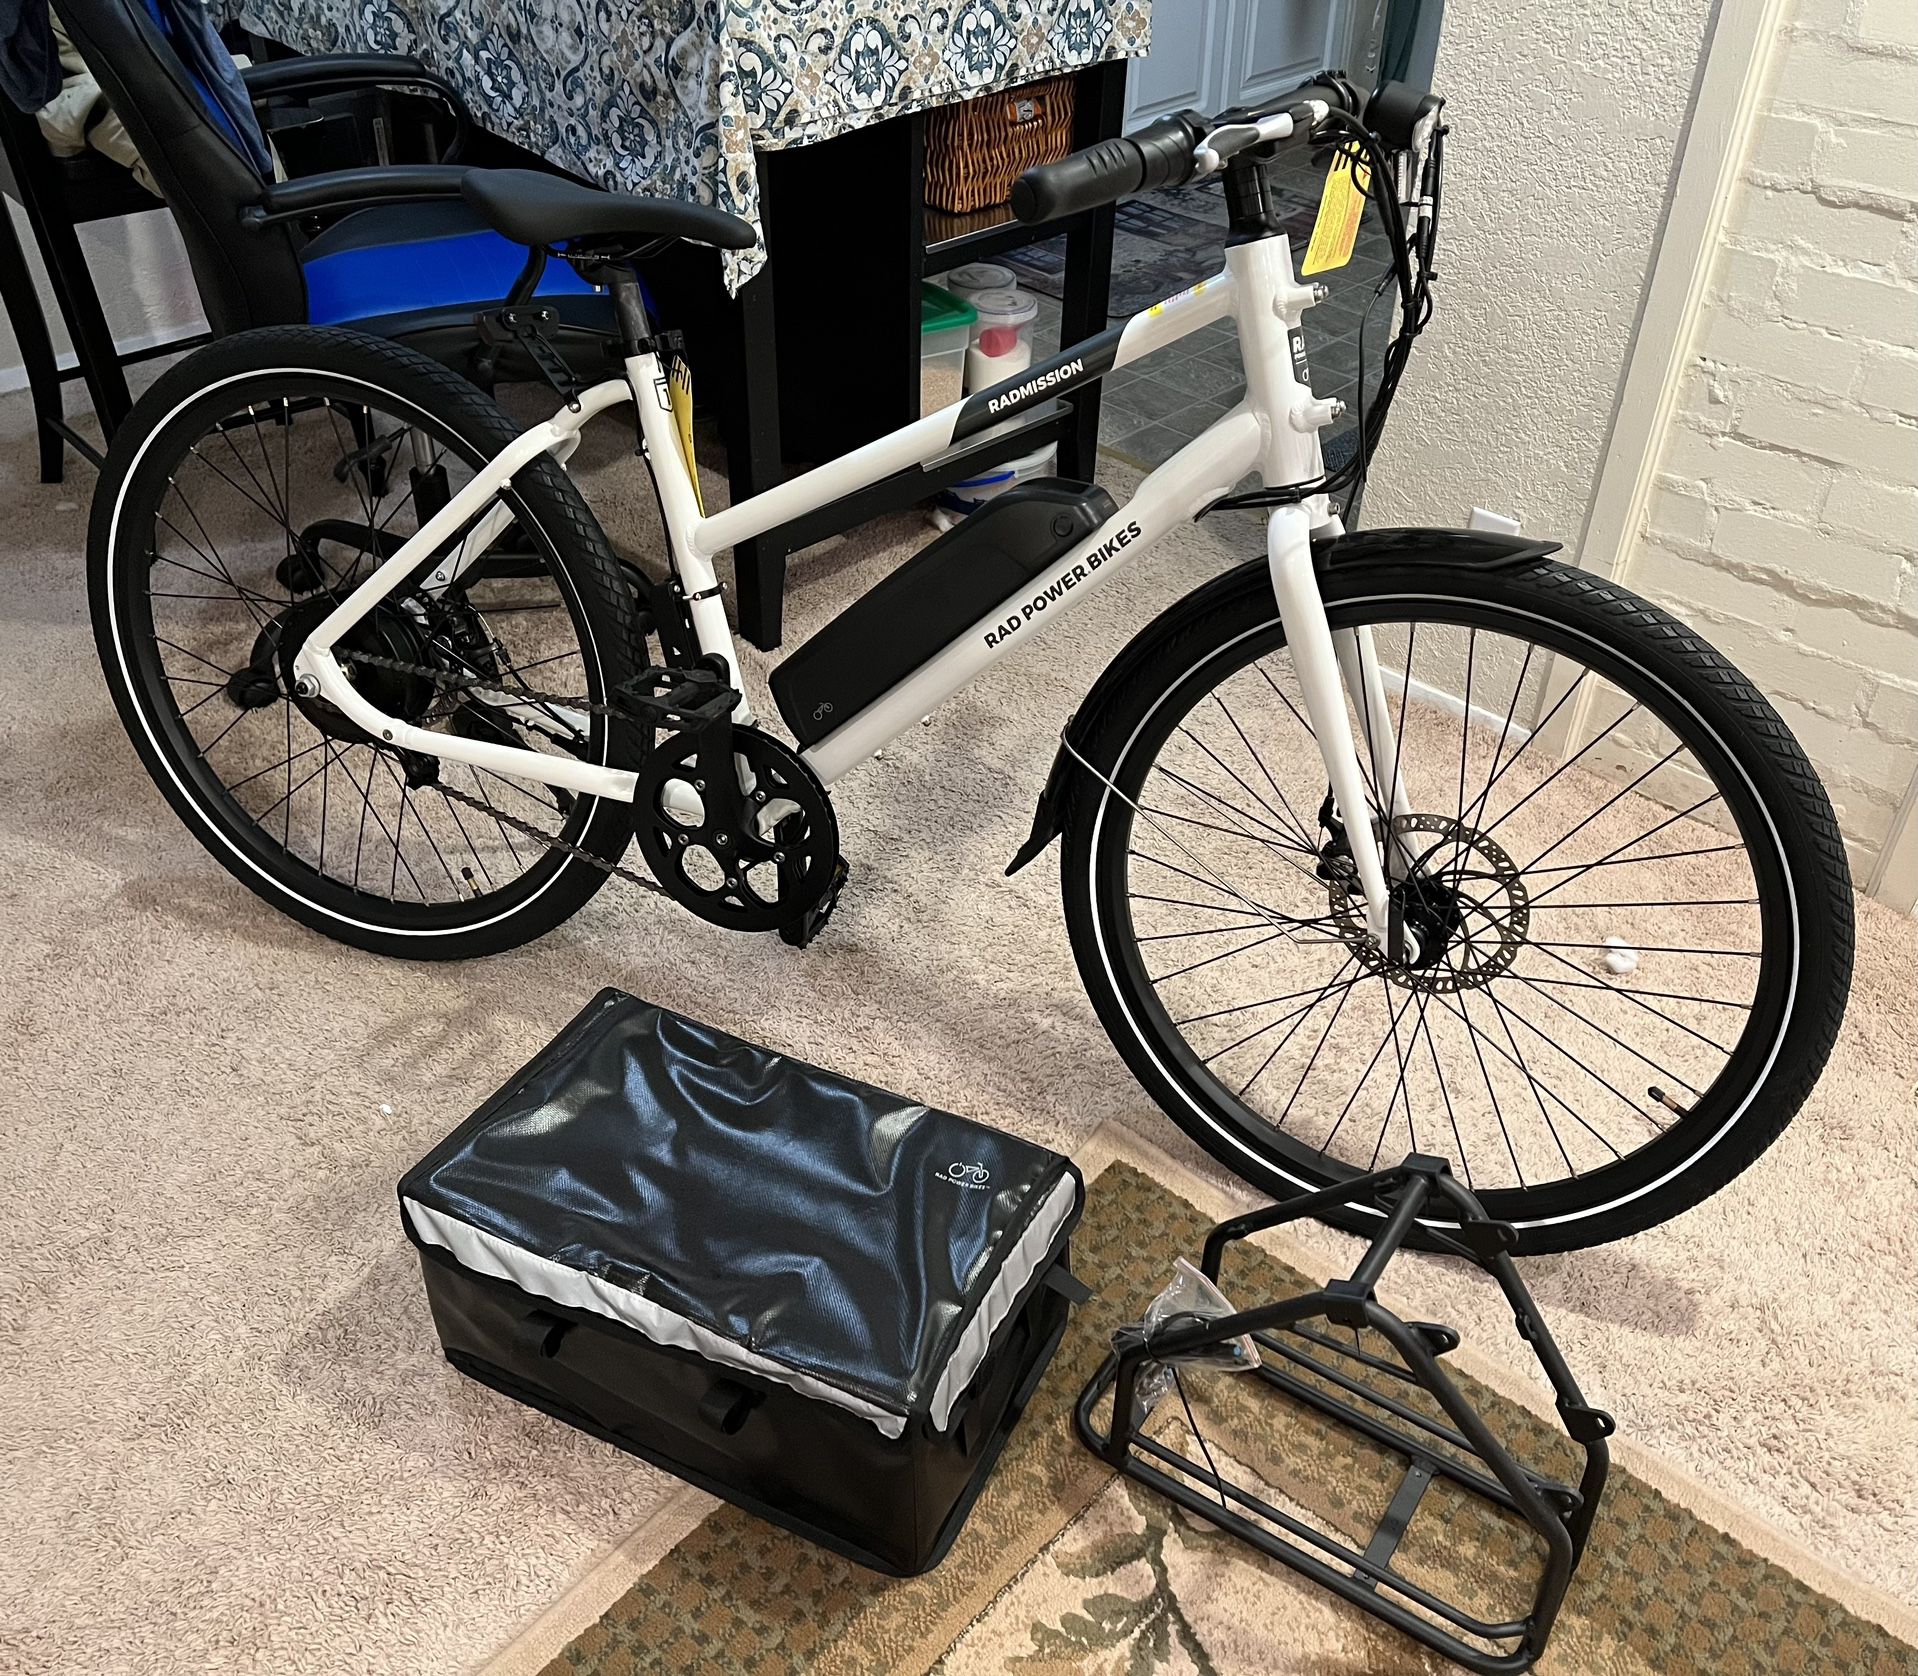 radpower mission ebike NEW Condition plus extras